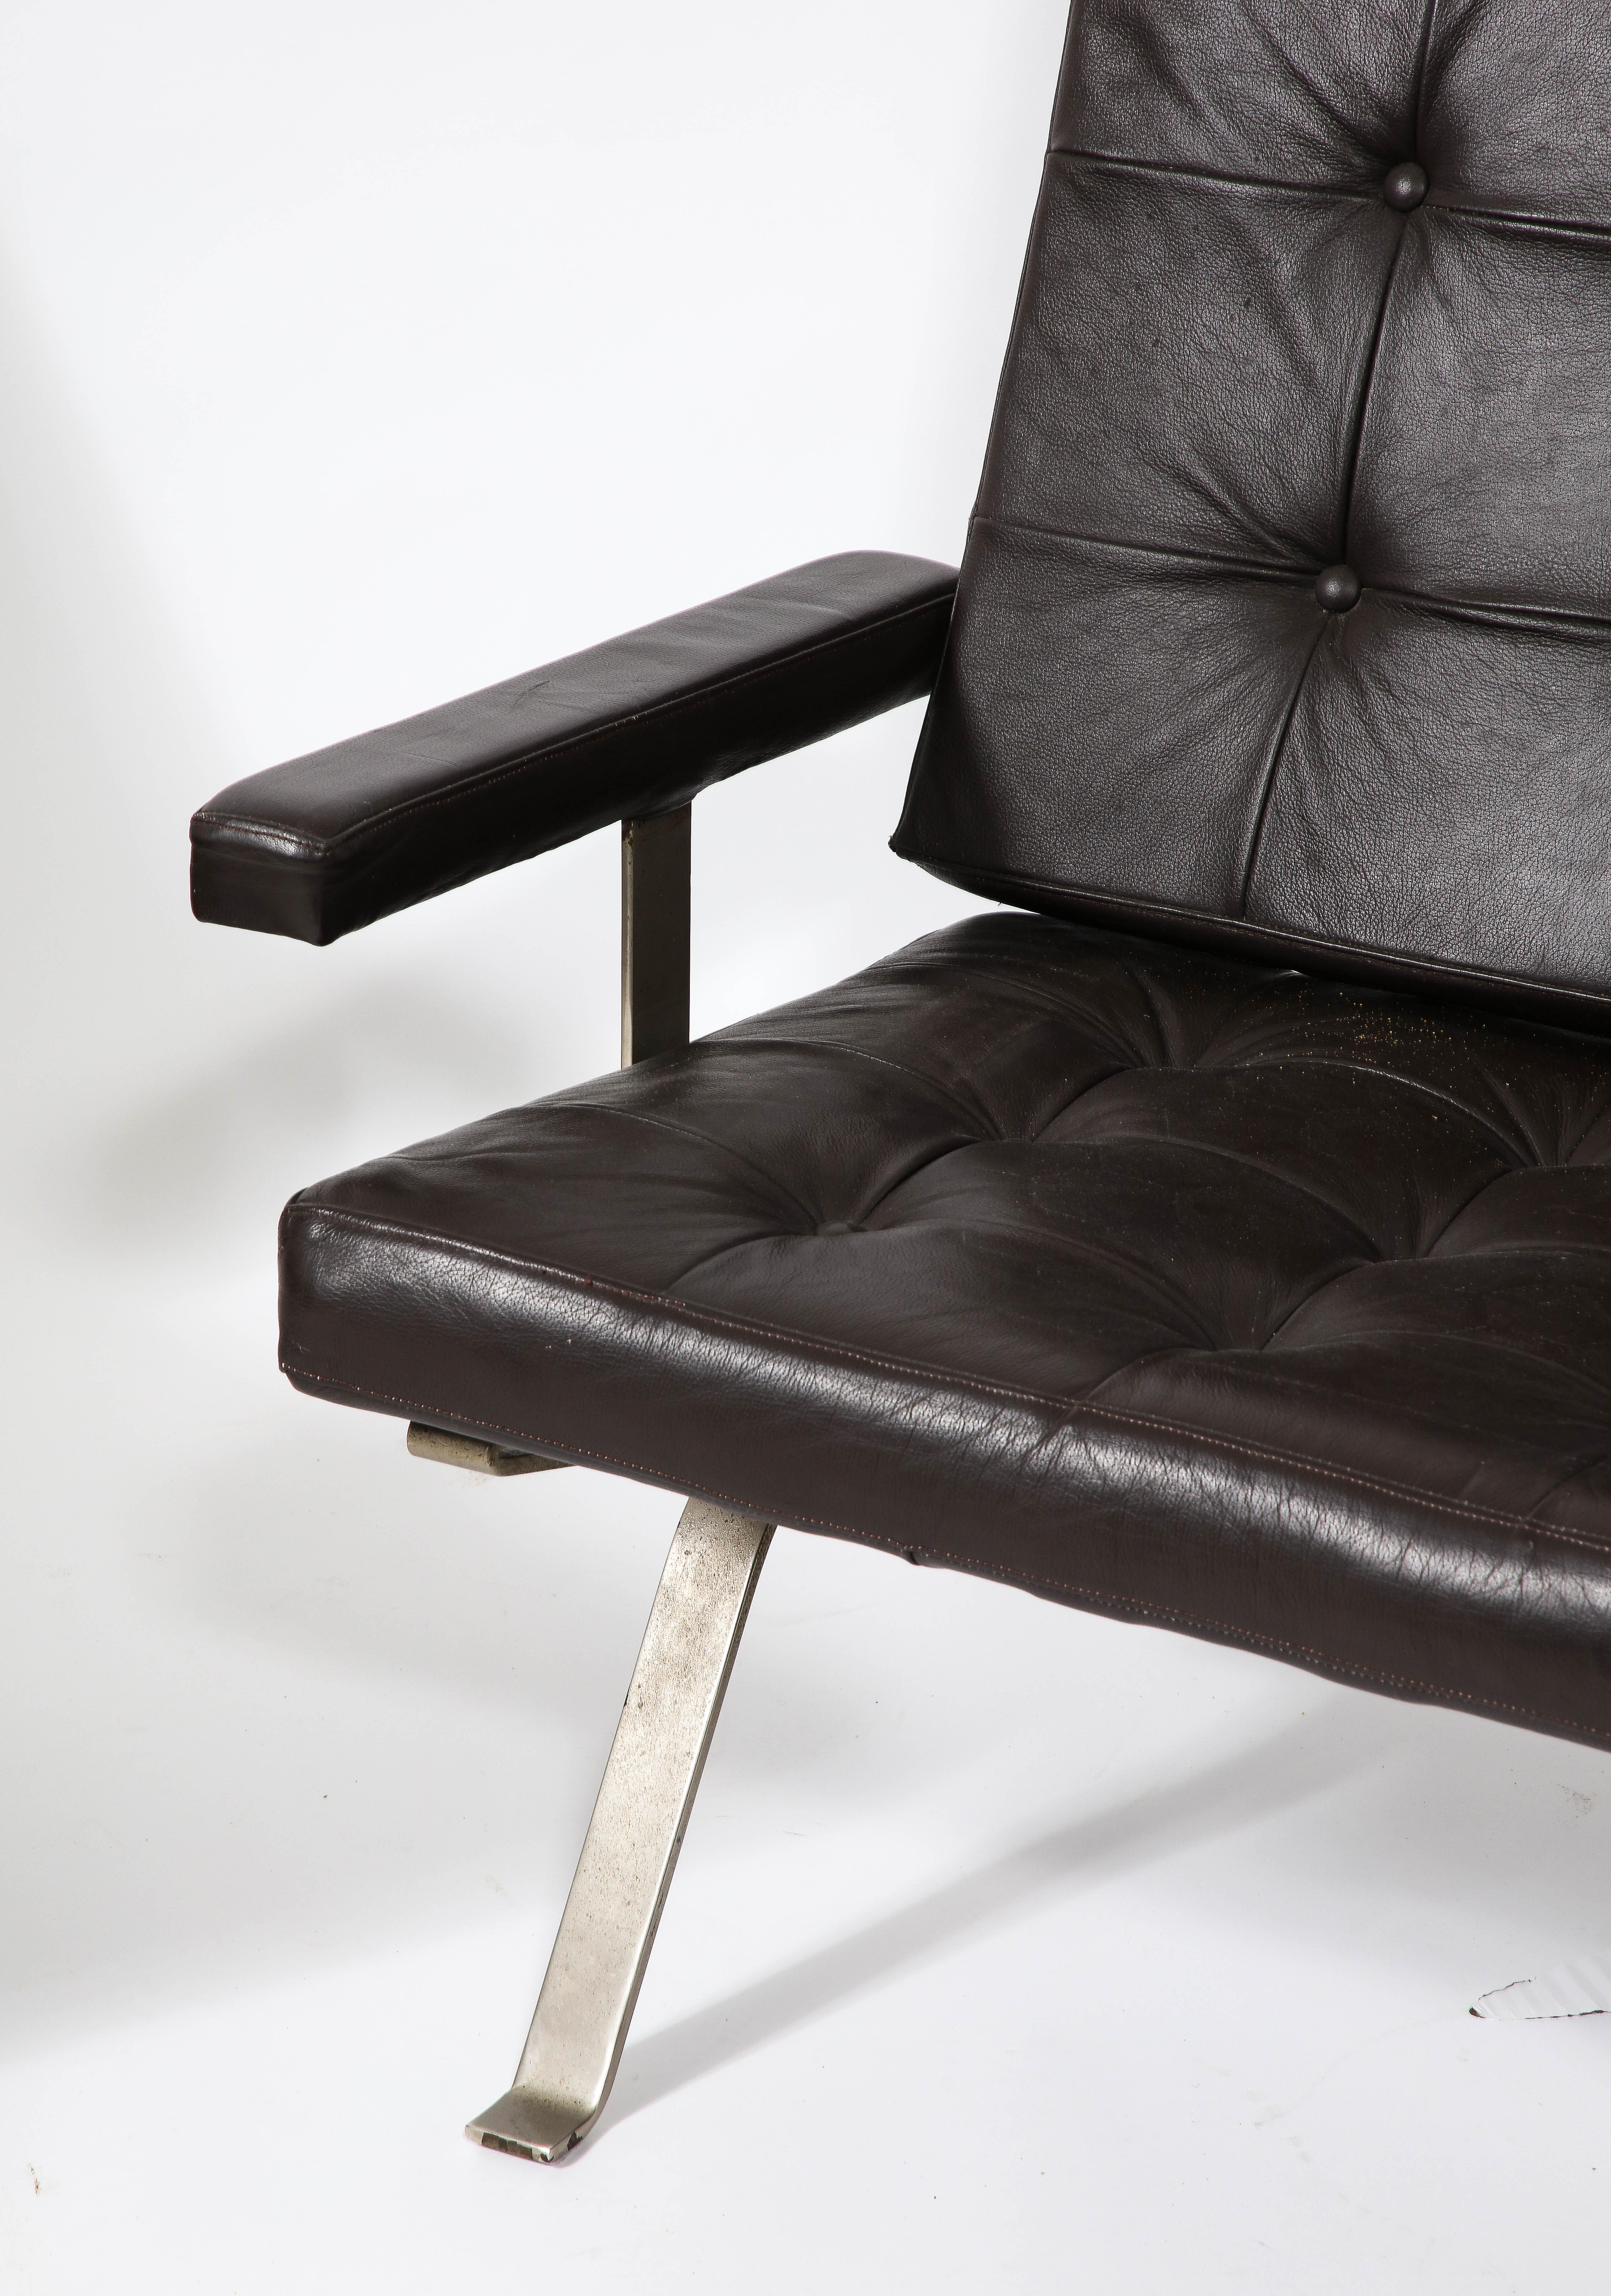 Elegant classic modernist chair. Reminiscent of Mies van der Rohe's Barcelona chair. In original leather upholstery. Ergonomic sit. 

Seat depth is 18